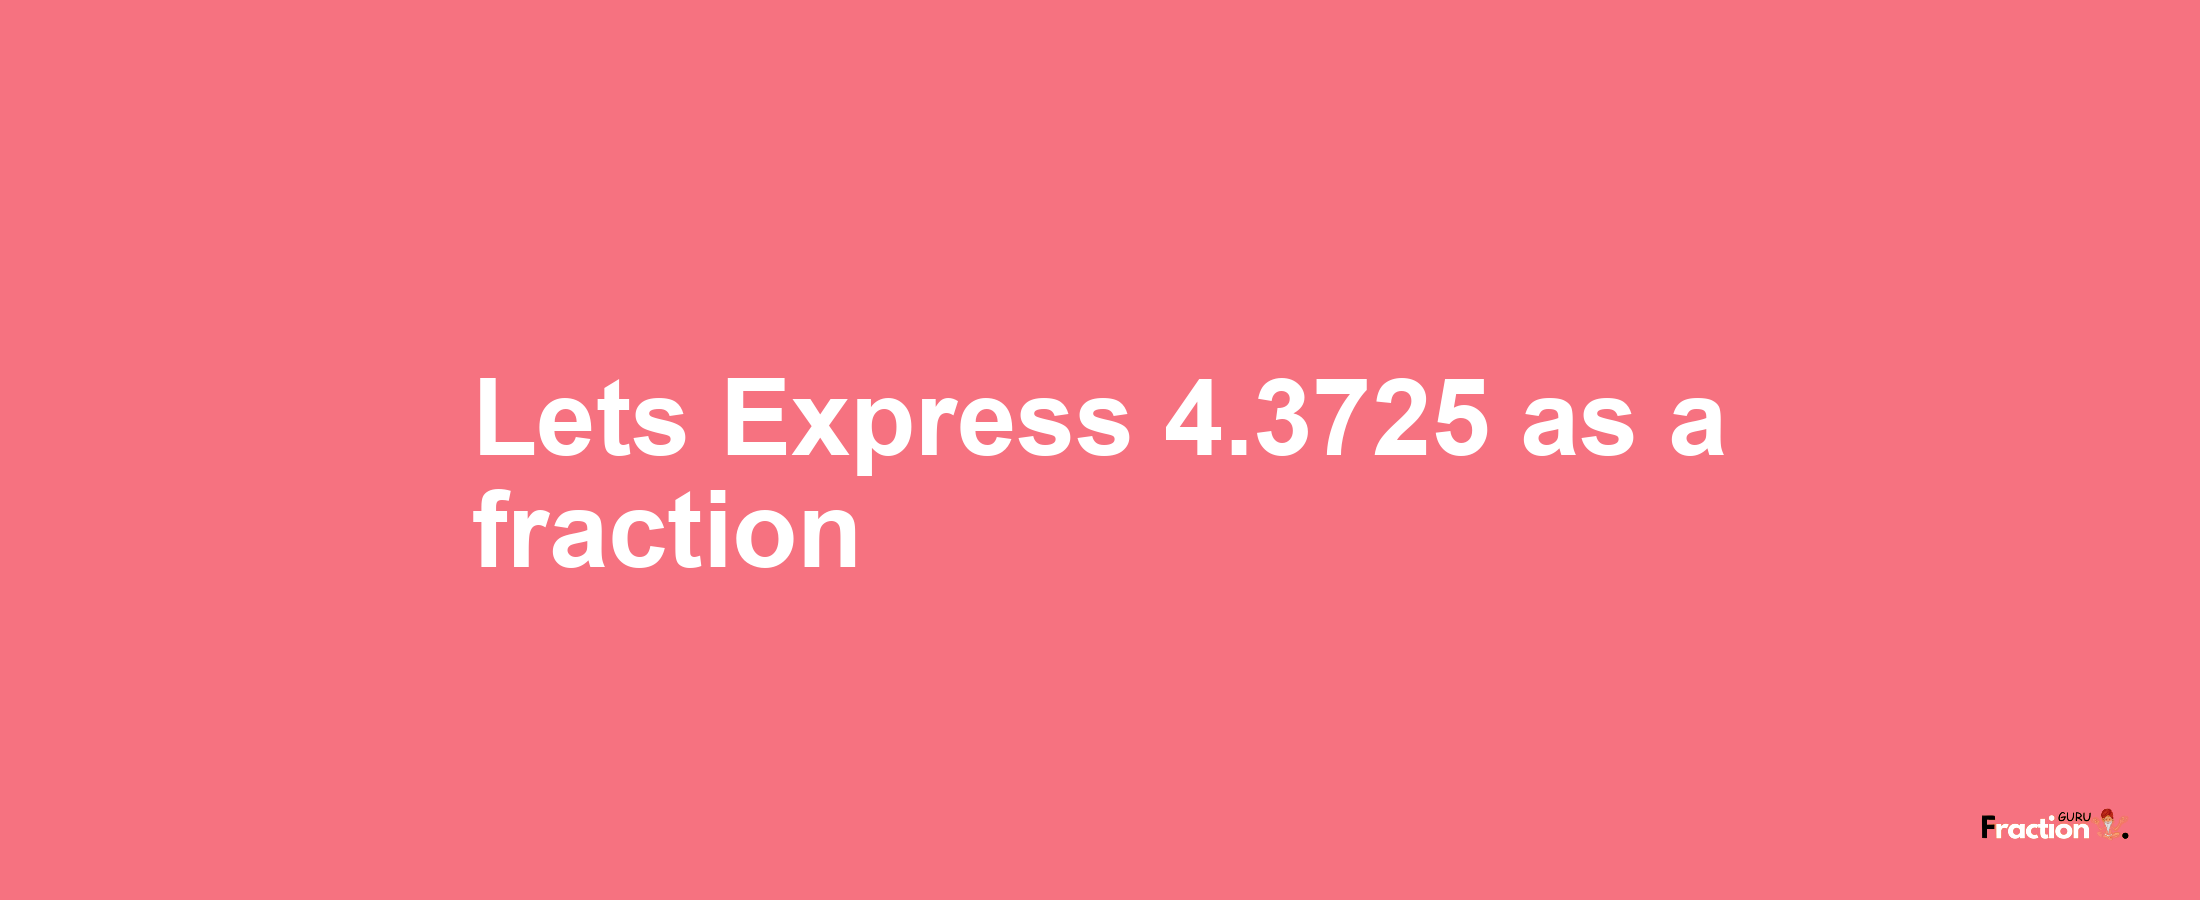 Lets Express 4.3725 as afraction